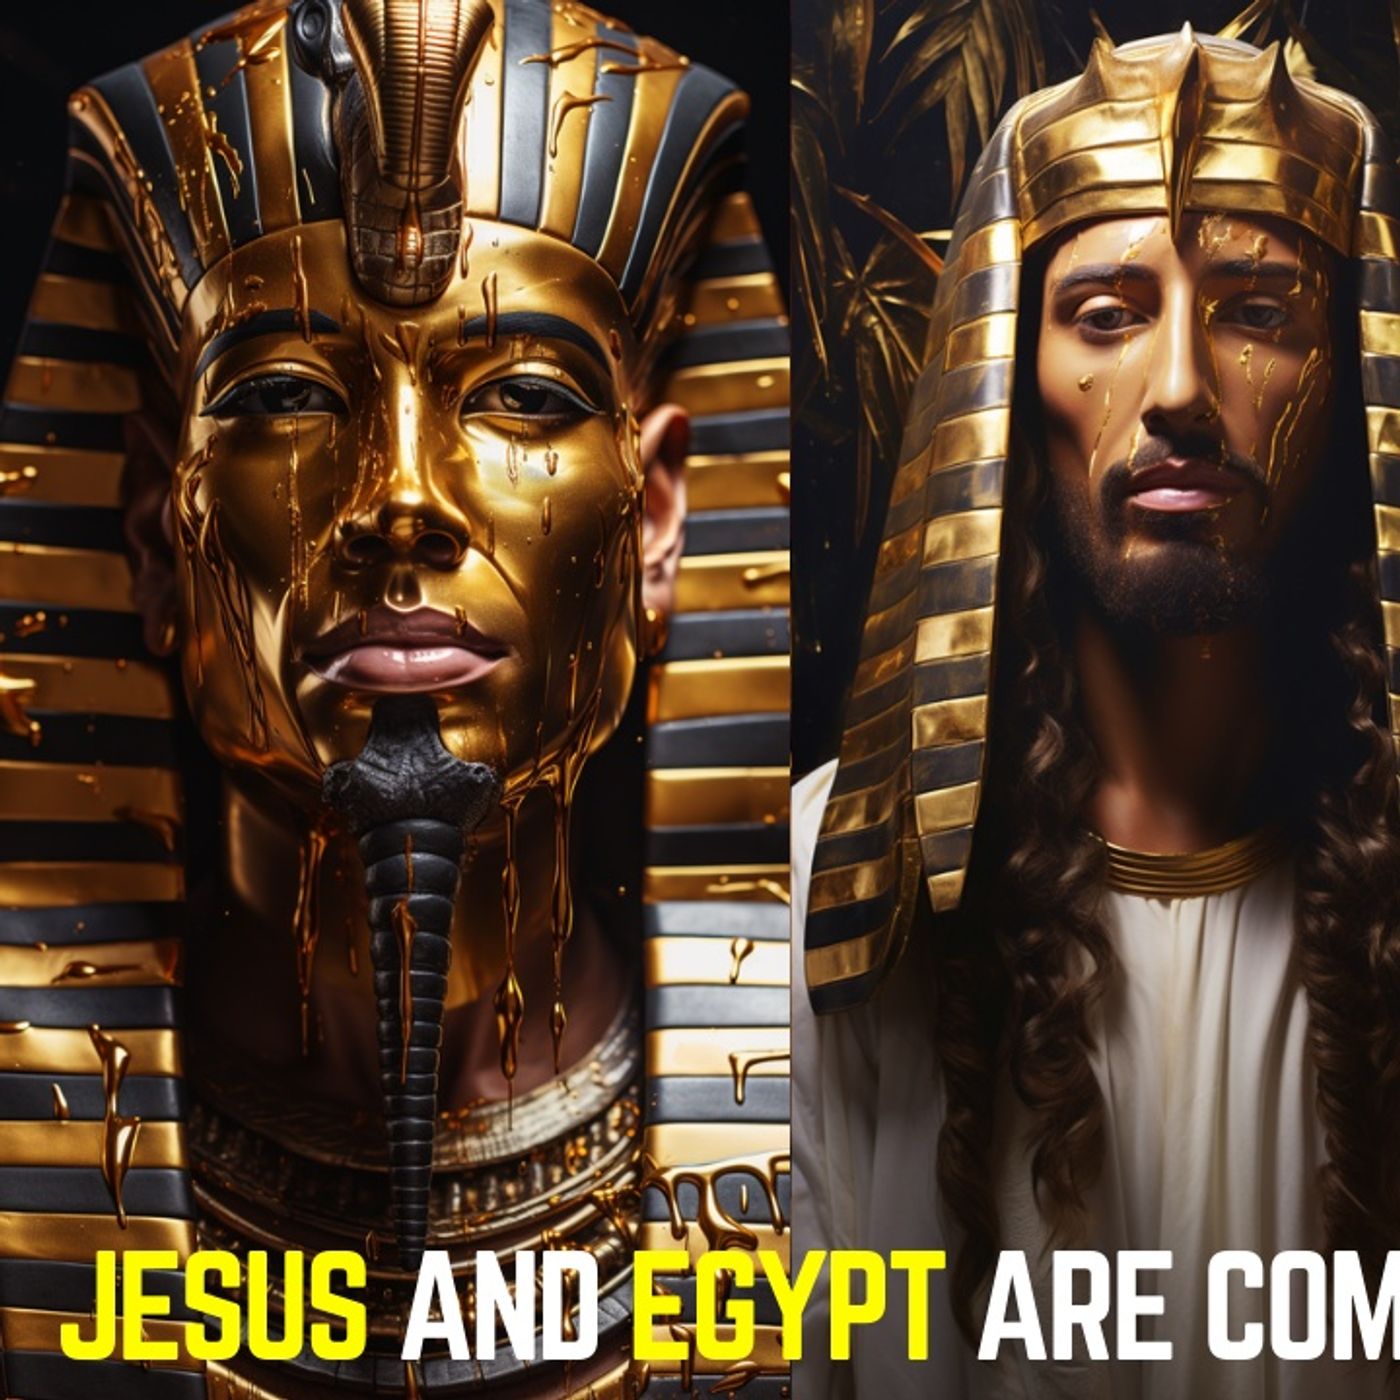 Christianity And Egyptian Religions Are Compatible! Now What? - Nelson Castille